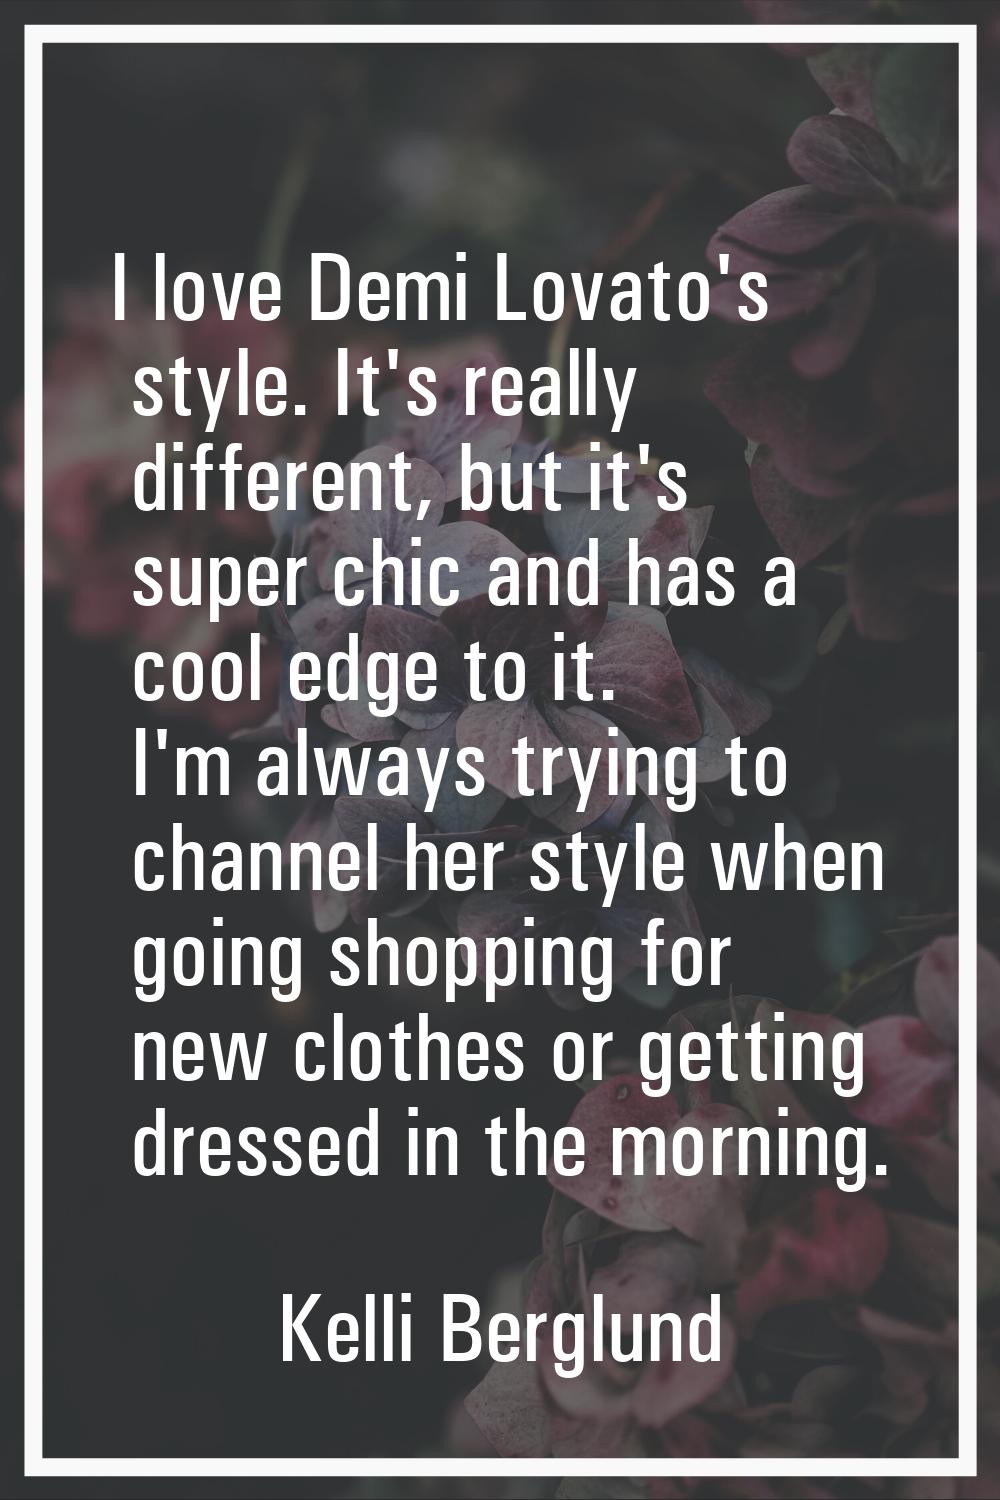 I love Demi Lovato's style. It's really different, but it's super chic and has a cool edge to it. I